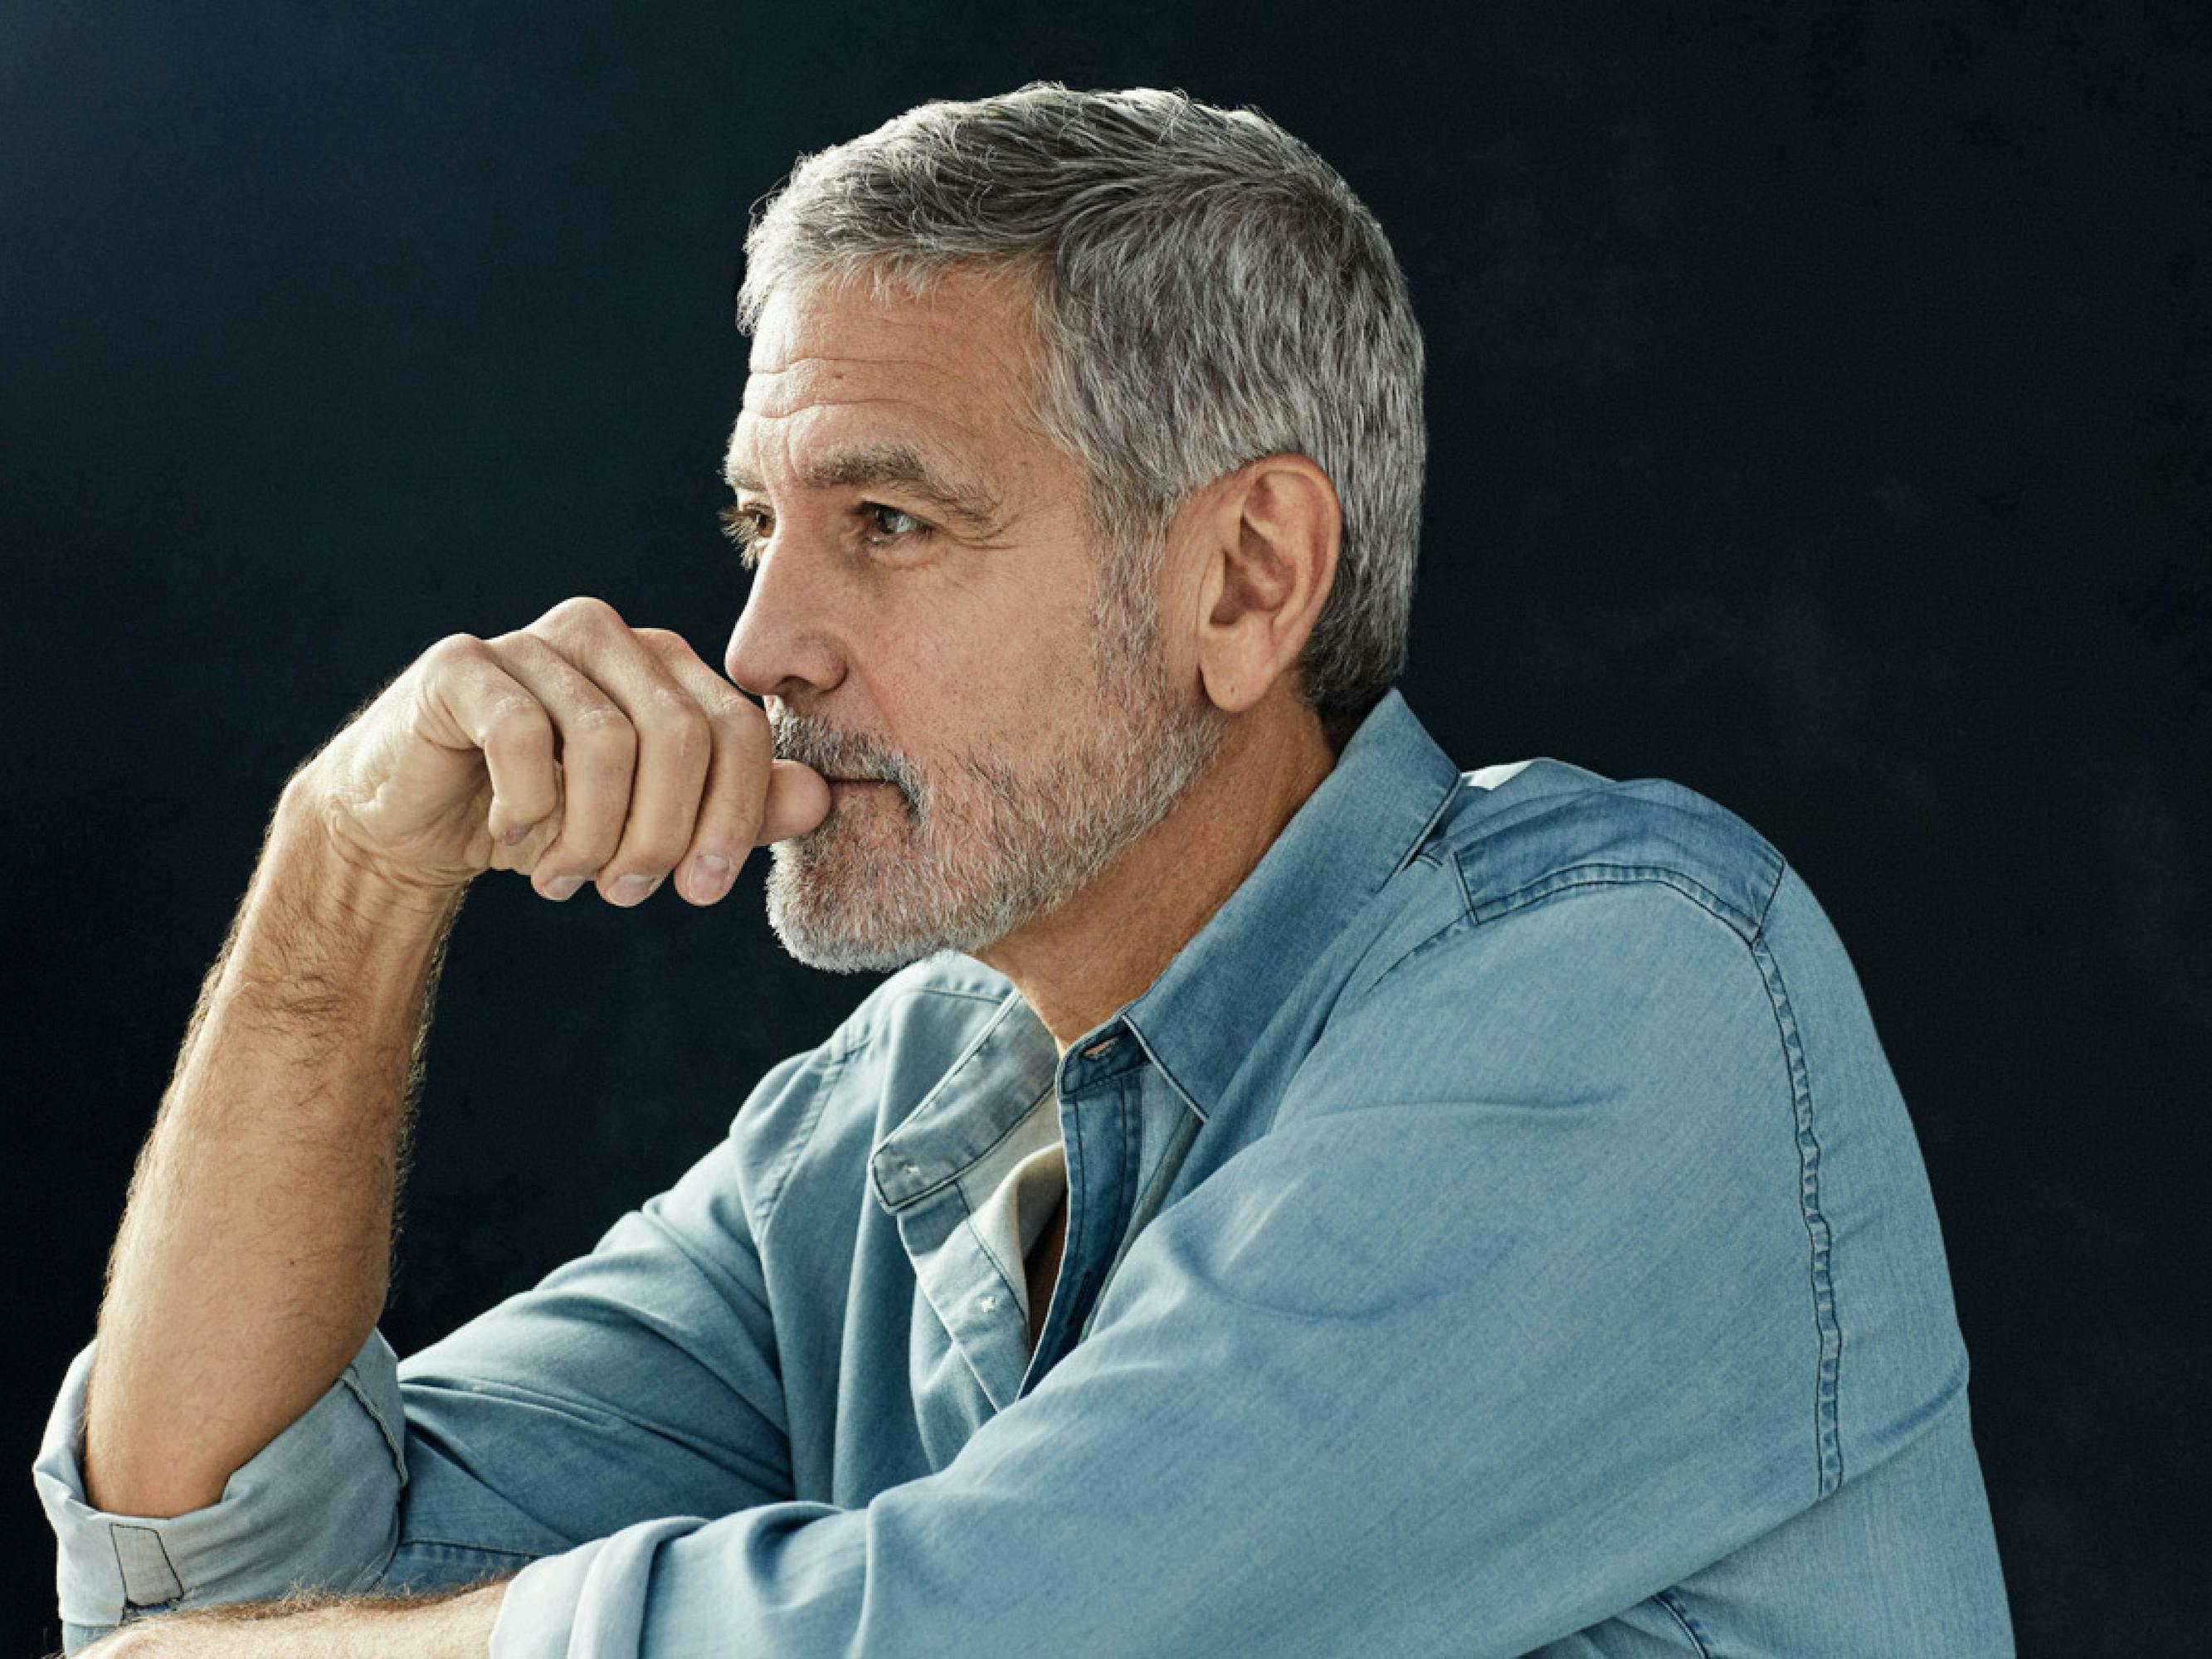 George Clooney looking pensive against a black background. Don’t you ever wonder if he’s thinking of you?